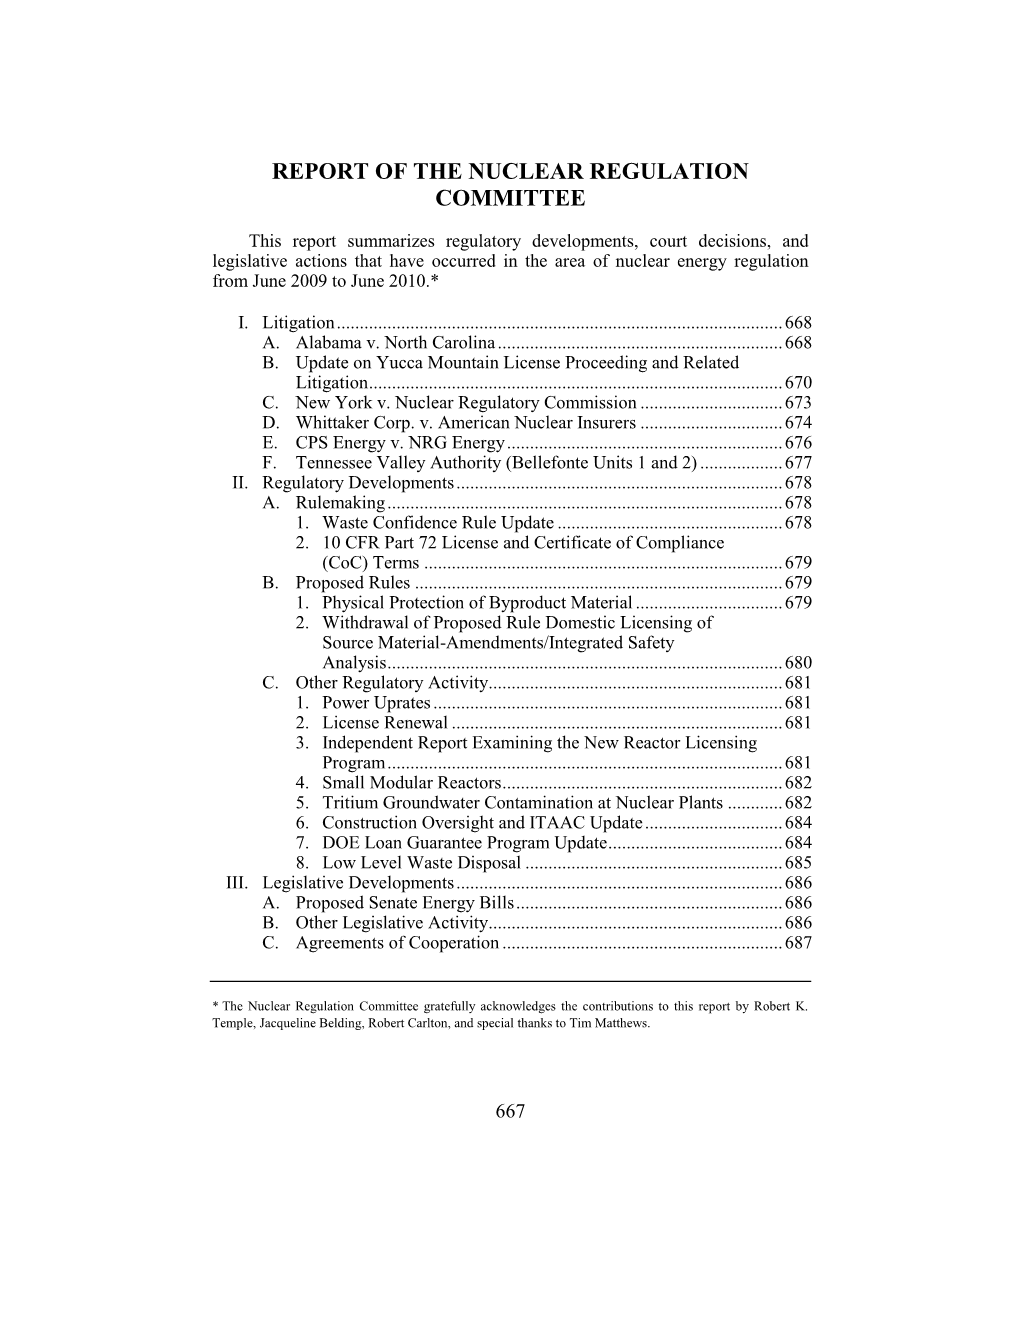 Report of the Nuclear Regulation Committee